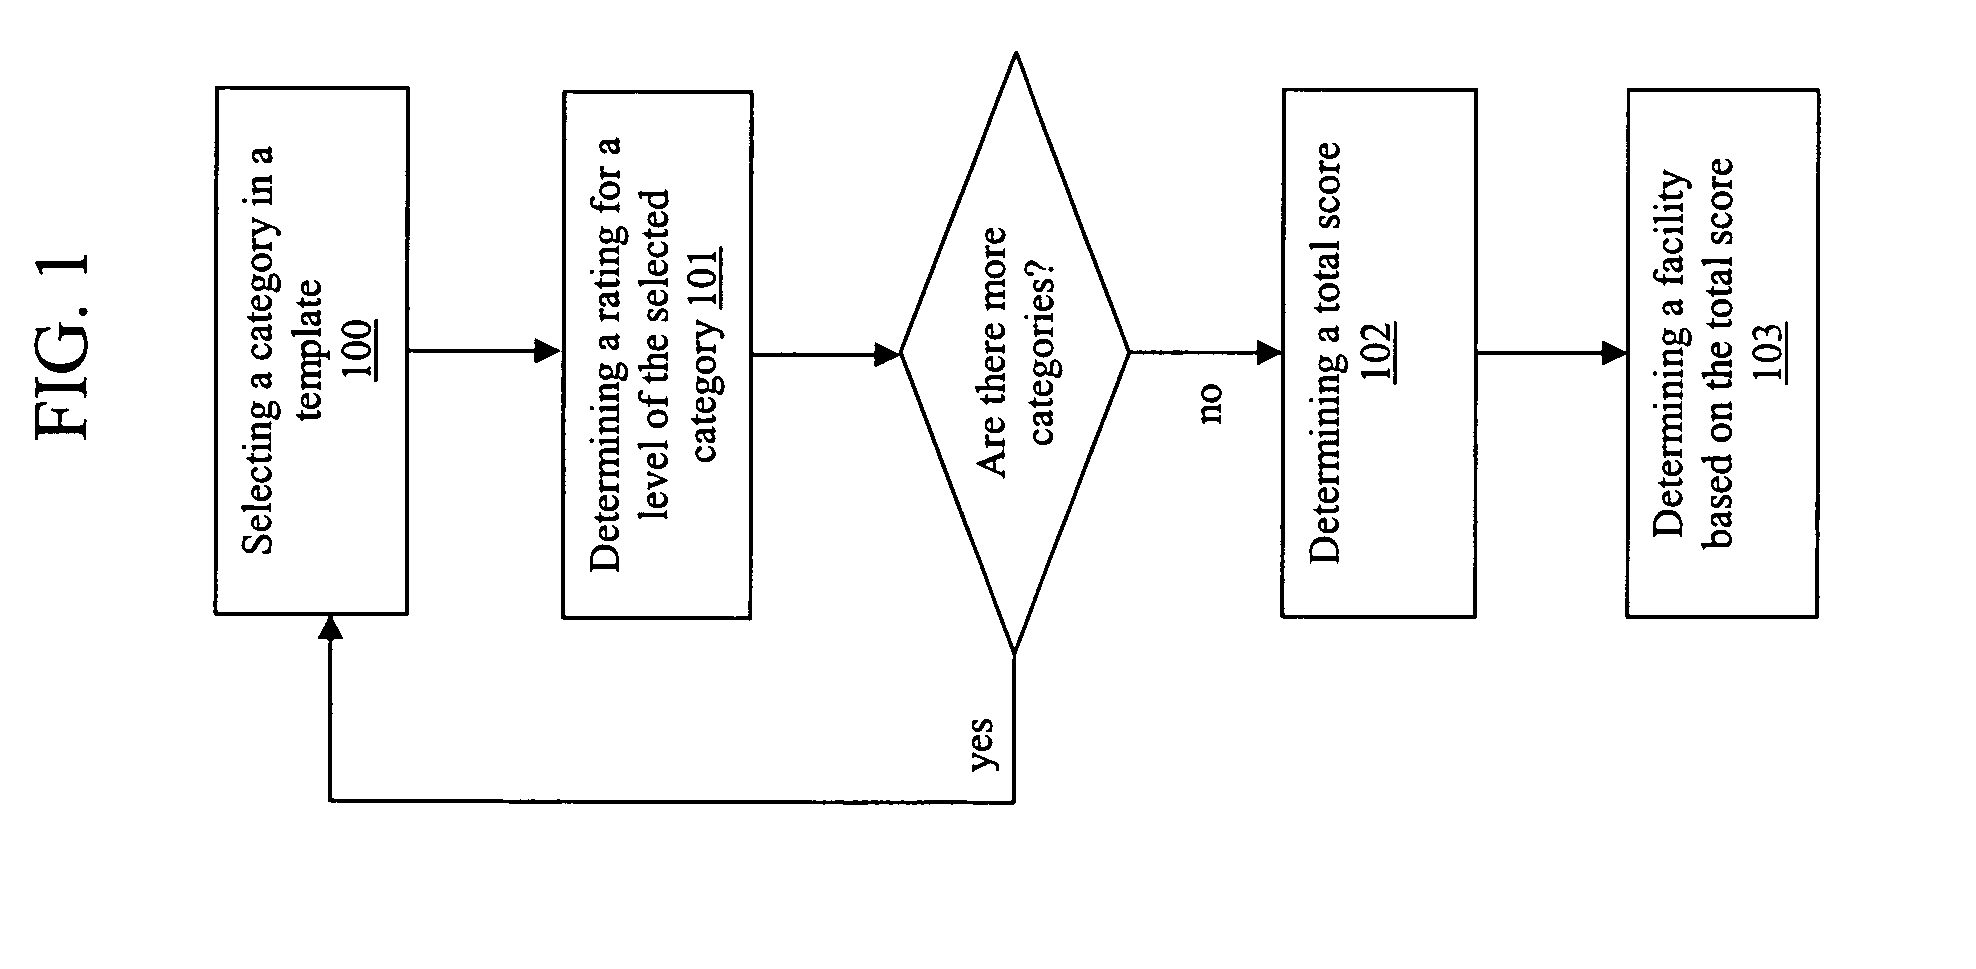 Methods for patient care using acuity templates